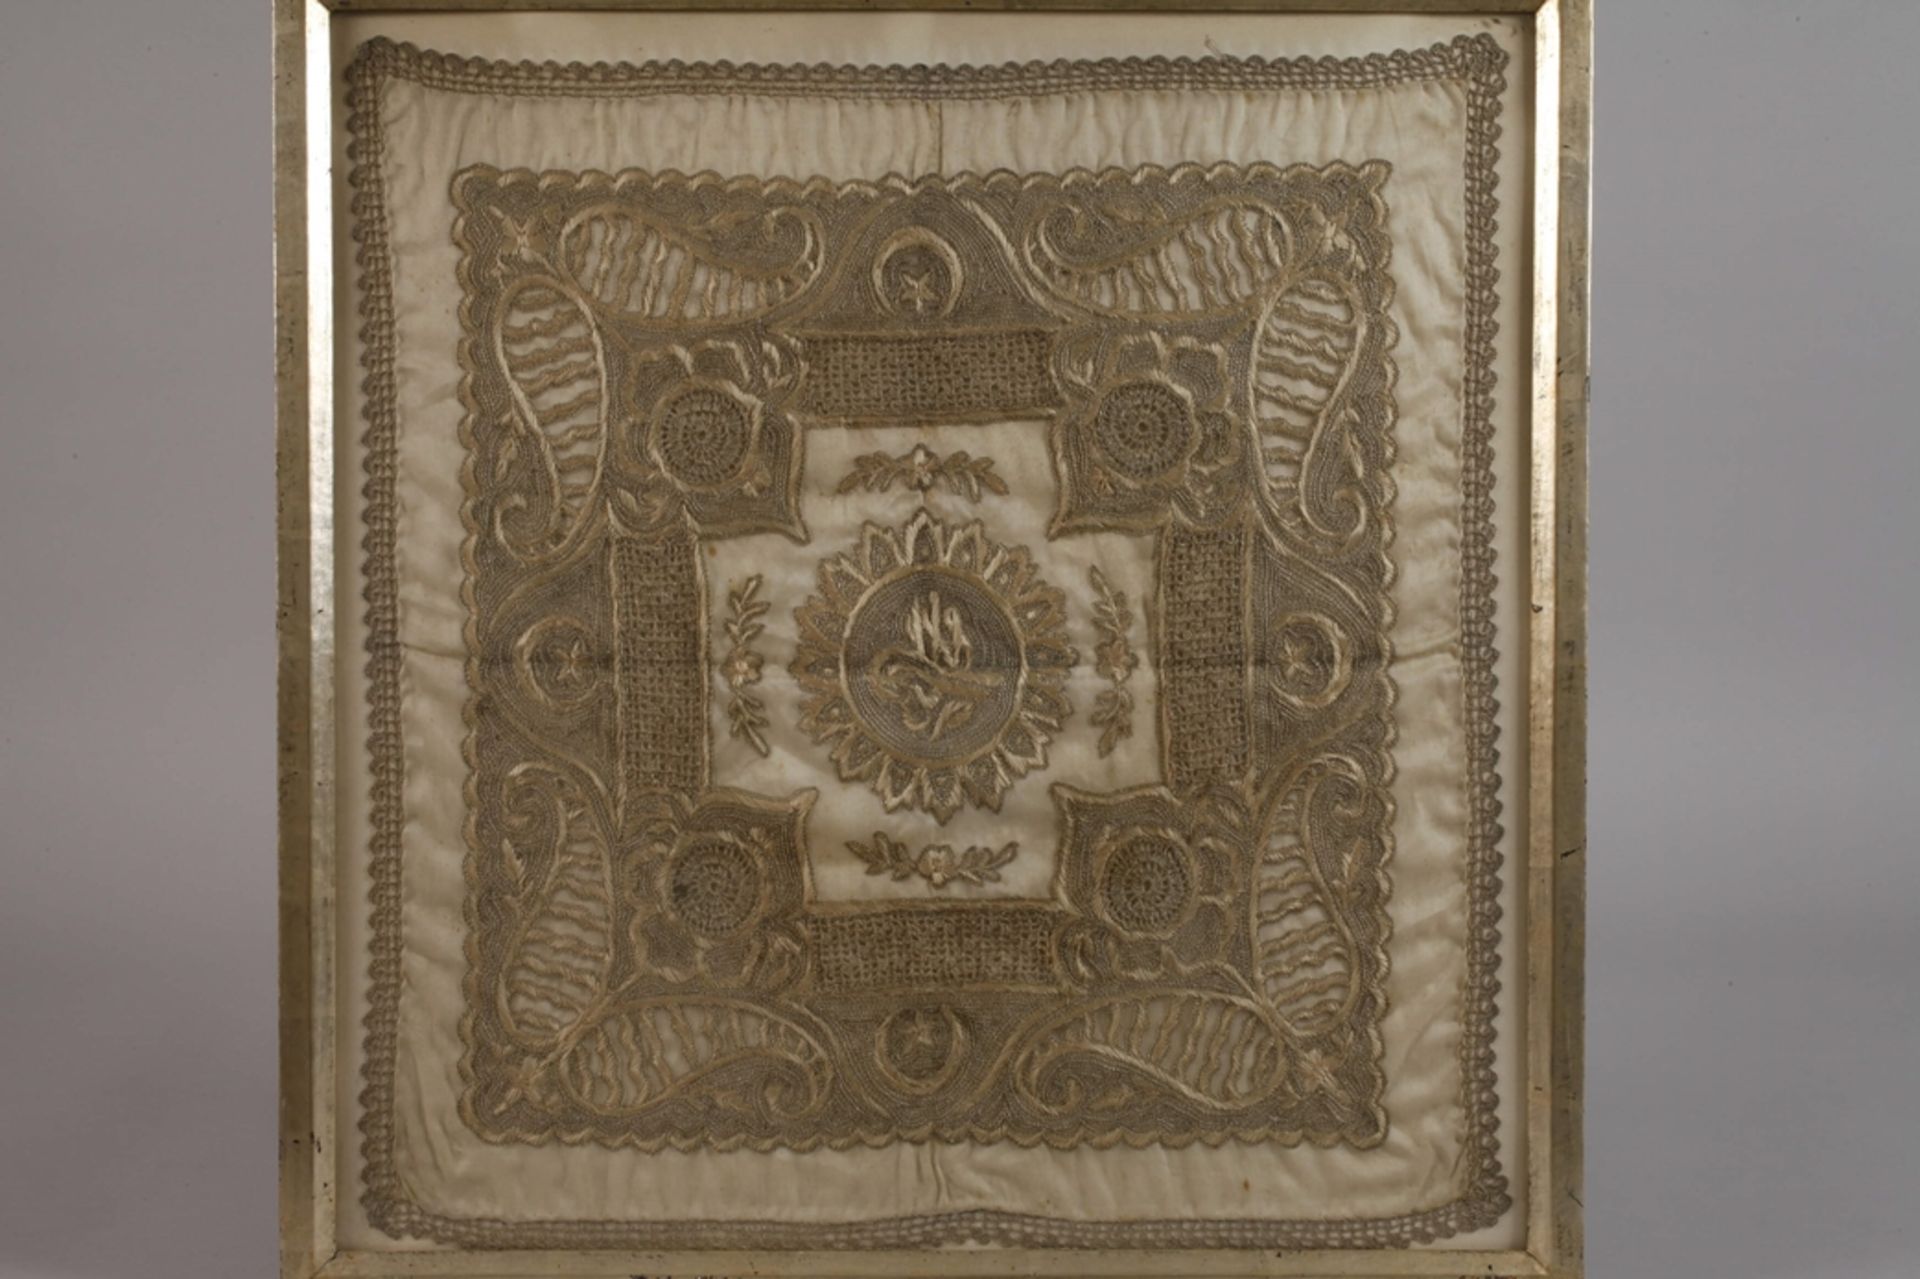 Decorative blanket with embroidery - Image 2 of 3